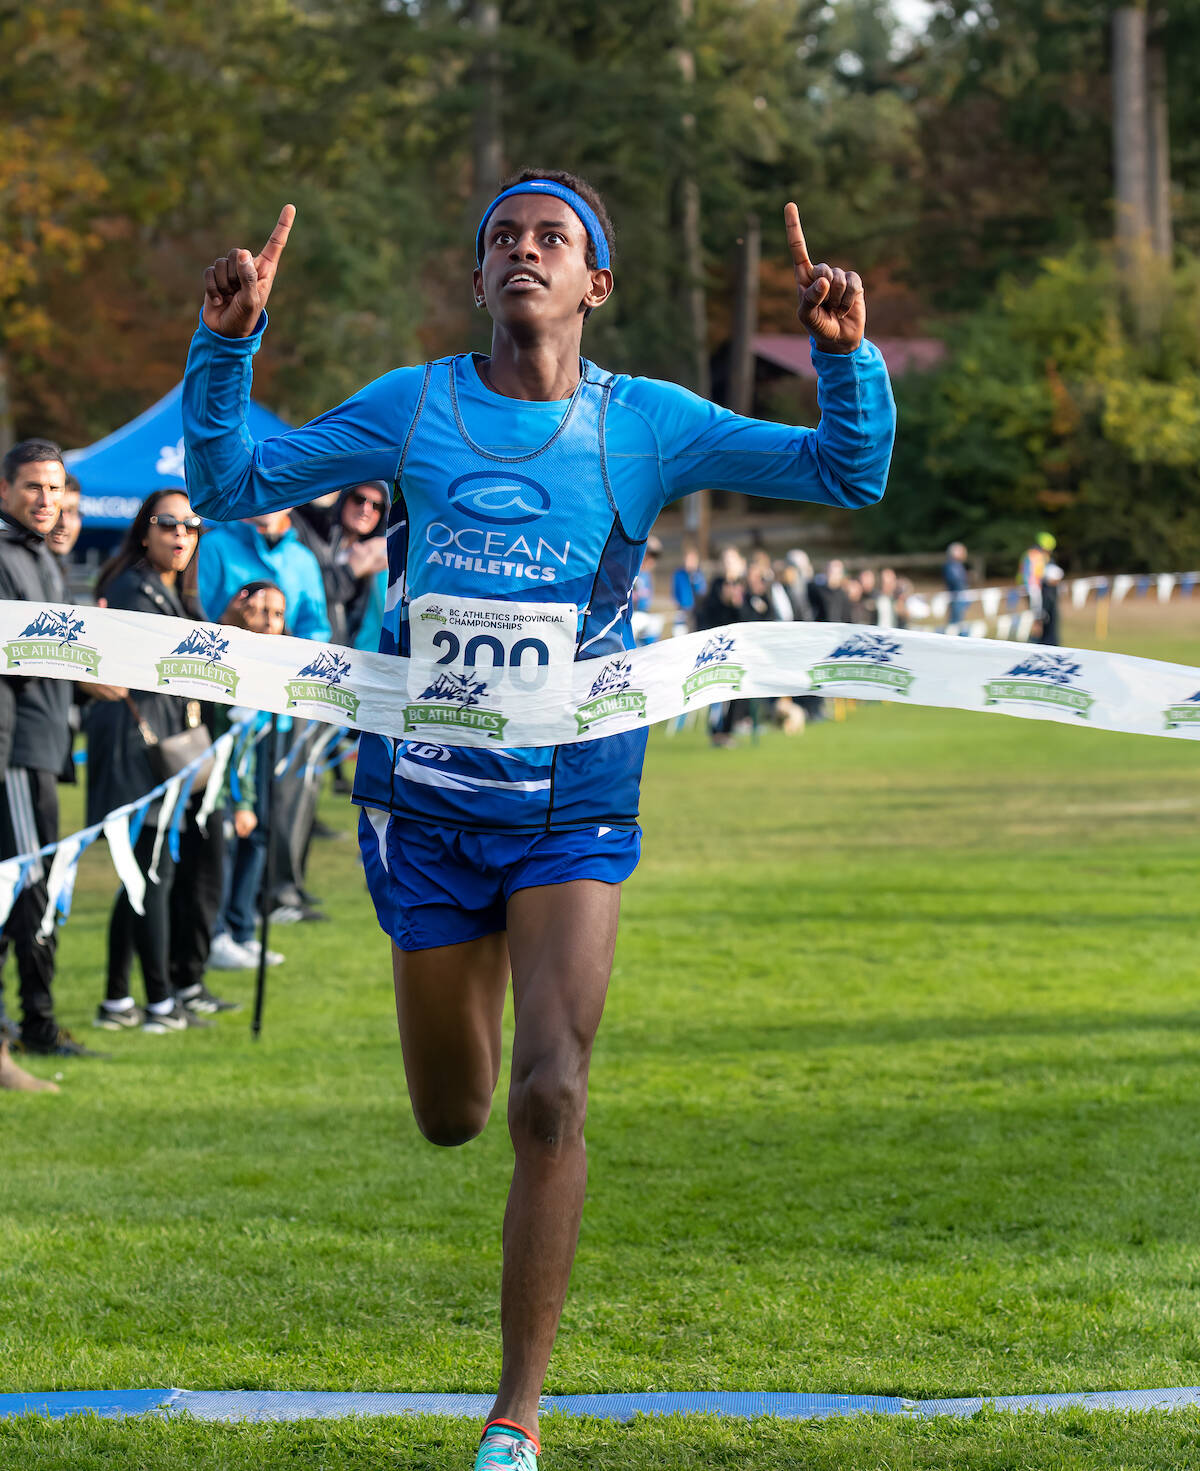 Track athlete Yemane Mulugeta, a student at L.A. Matheson Secondary in Whalley, crosses the finish line during a recent race. (Photo courtesy Sport BC)